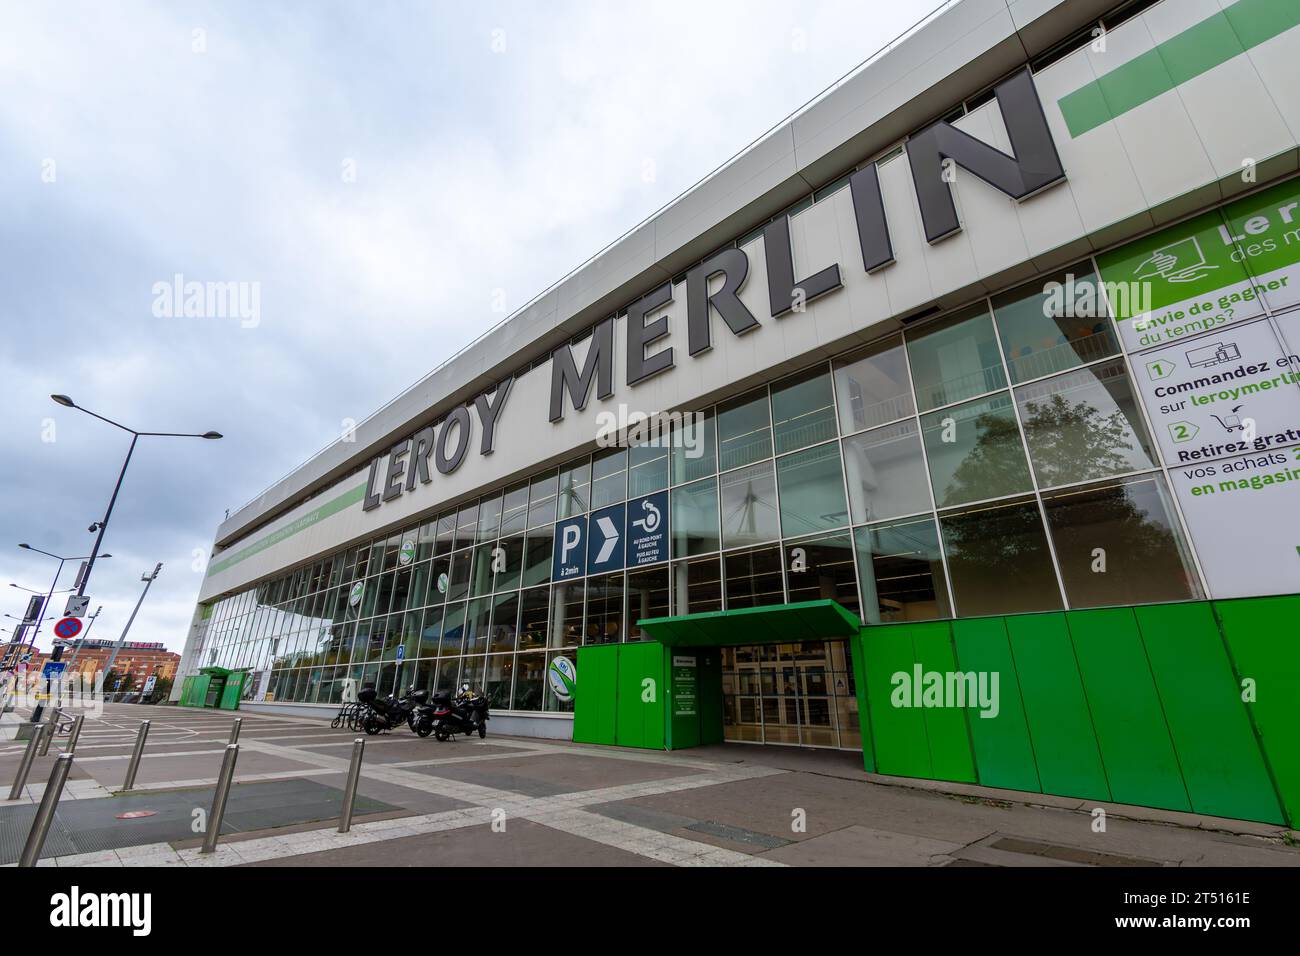 Exterior view of a Leroy Merlin store. Leroy Merlin is an international French retailer specializing in DIY, home renovation and gardening Stock Photo